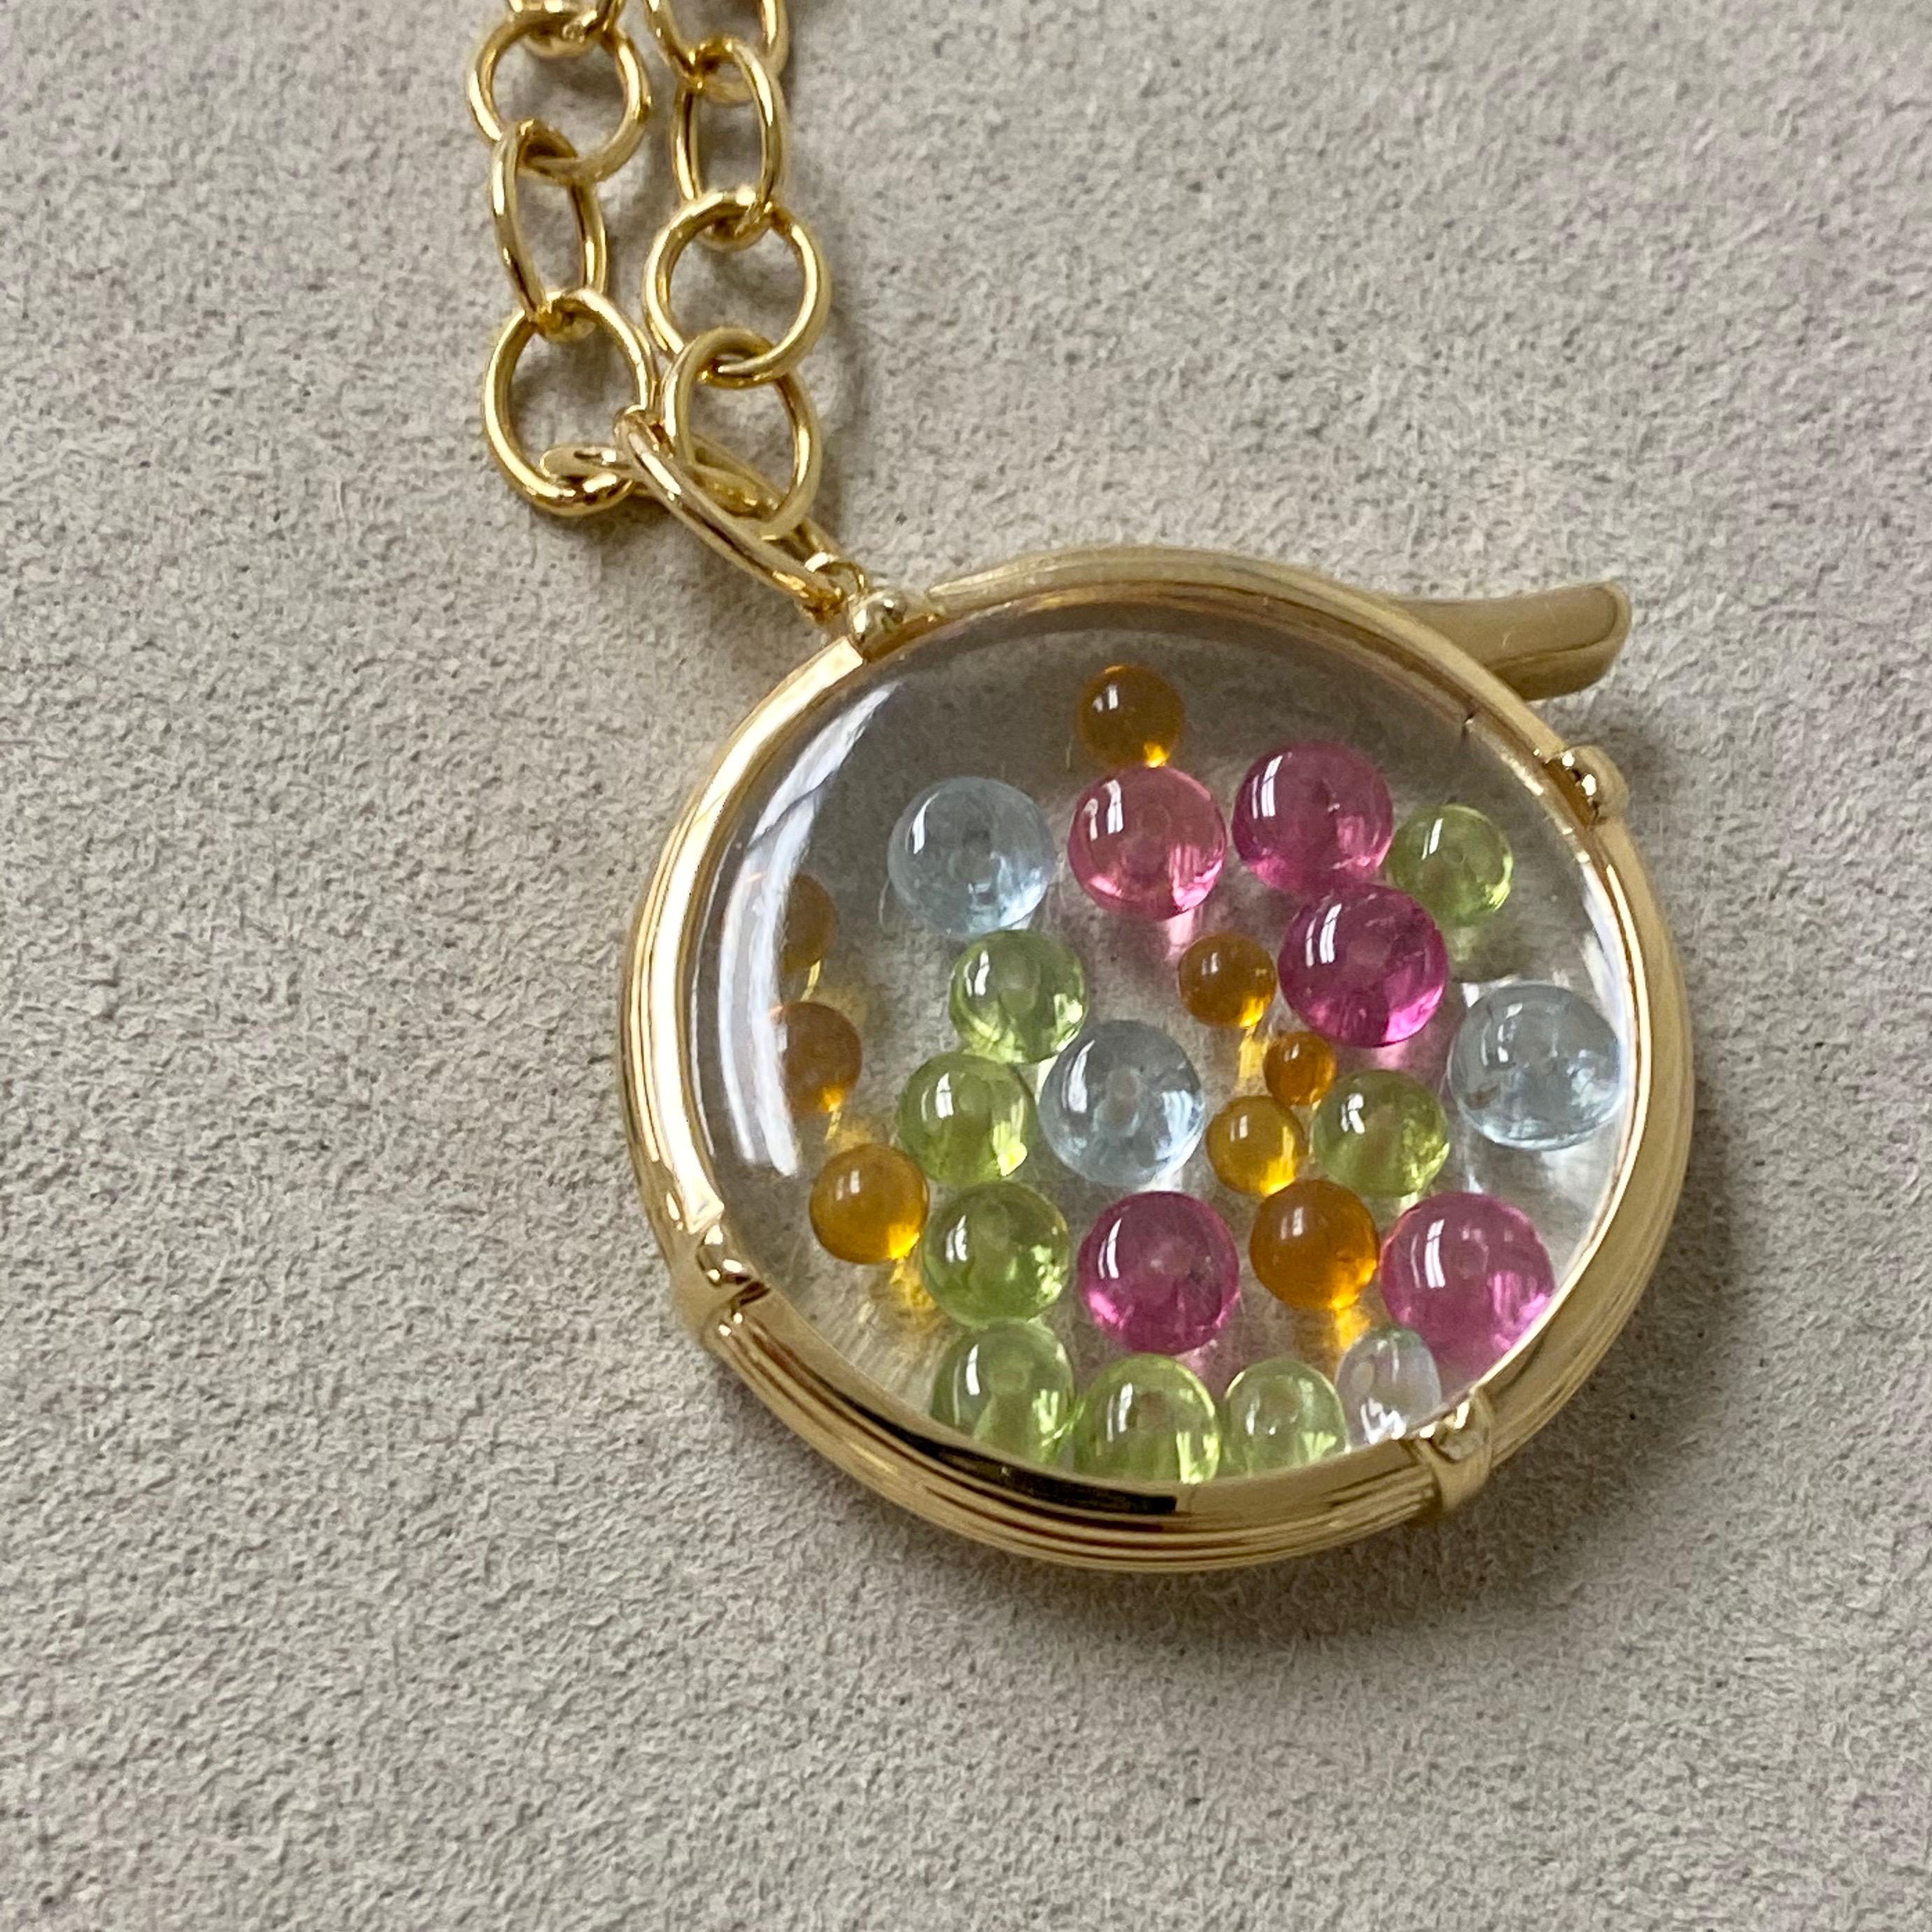 Created in 18 karat yellow gold 
Crystal plates 21 carats approx.
Multi color gemstone beads
Openable and reversible locket
Chain sold separately
Limited Edition

About the Designers ~ Dharmesh & Namrata

Drawing inspiration from little things,